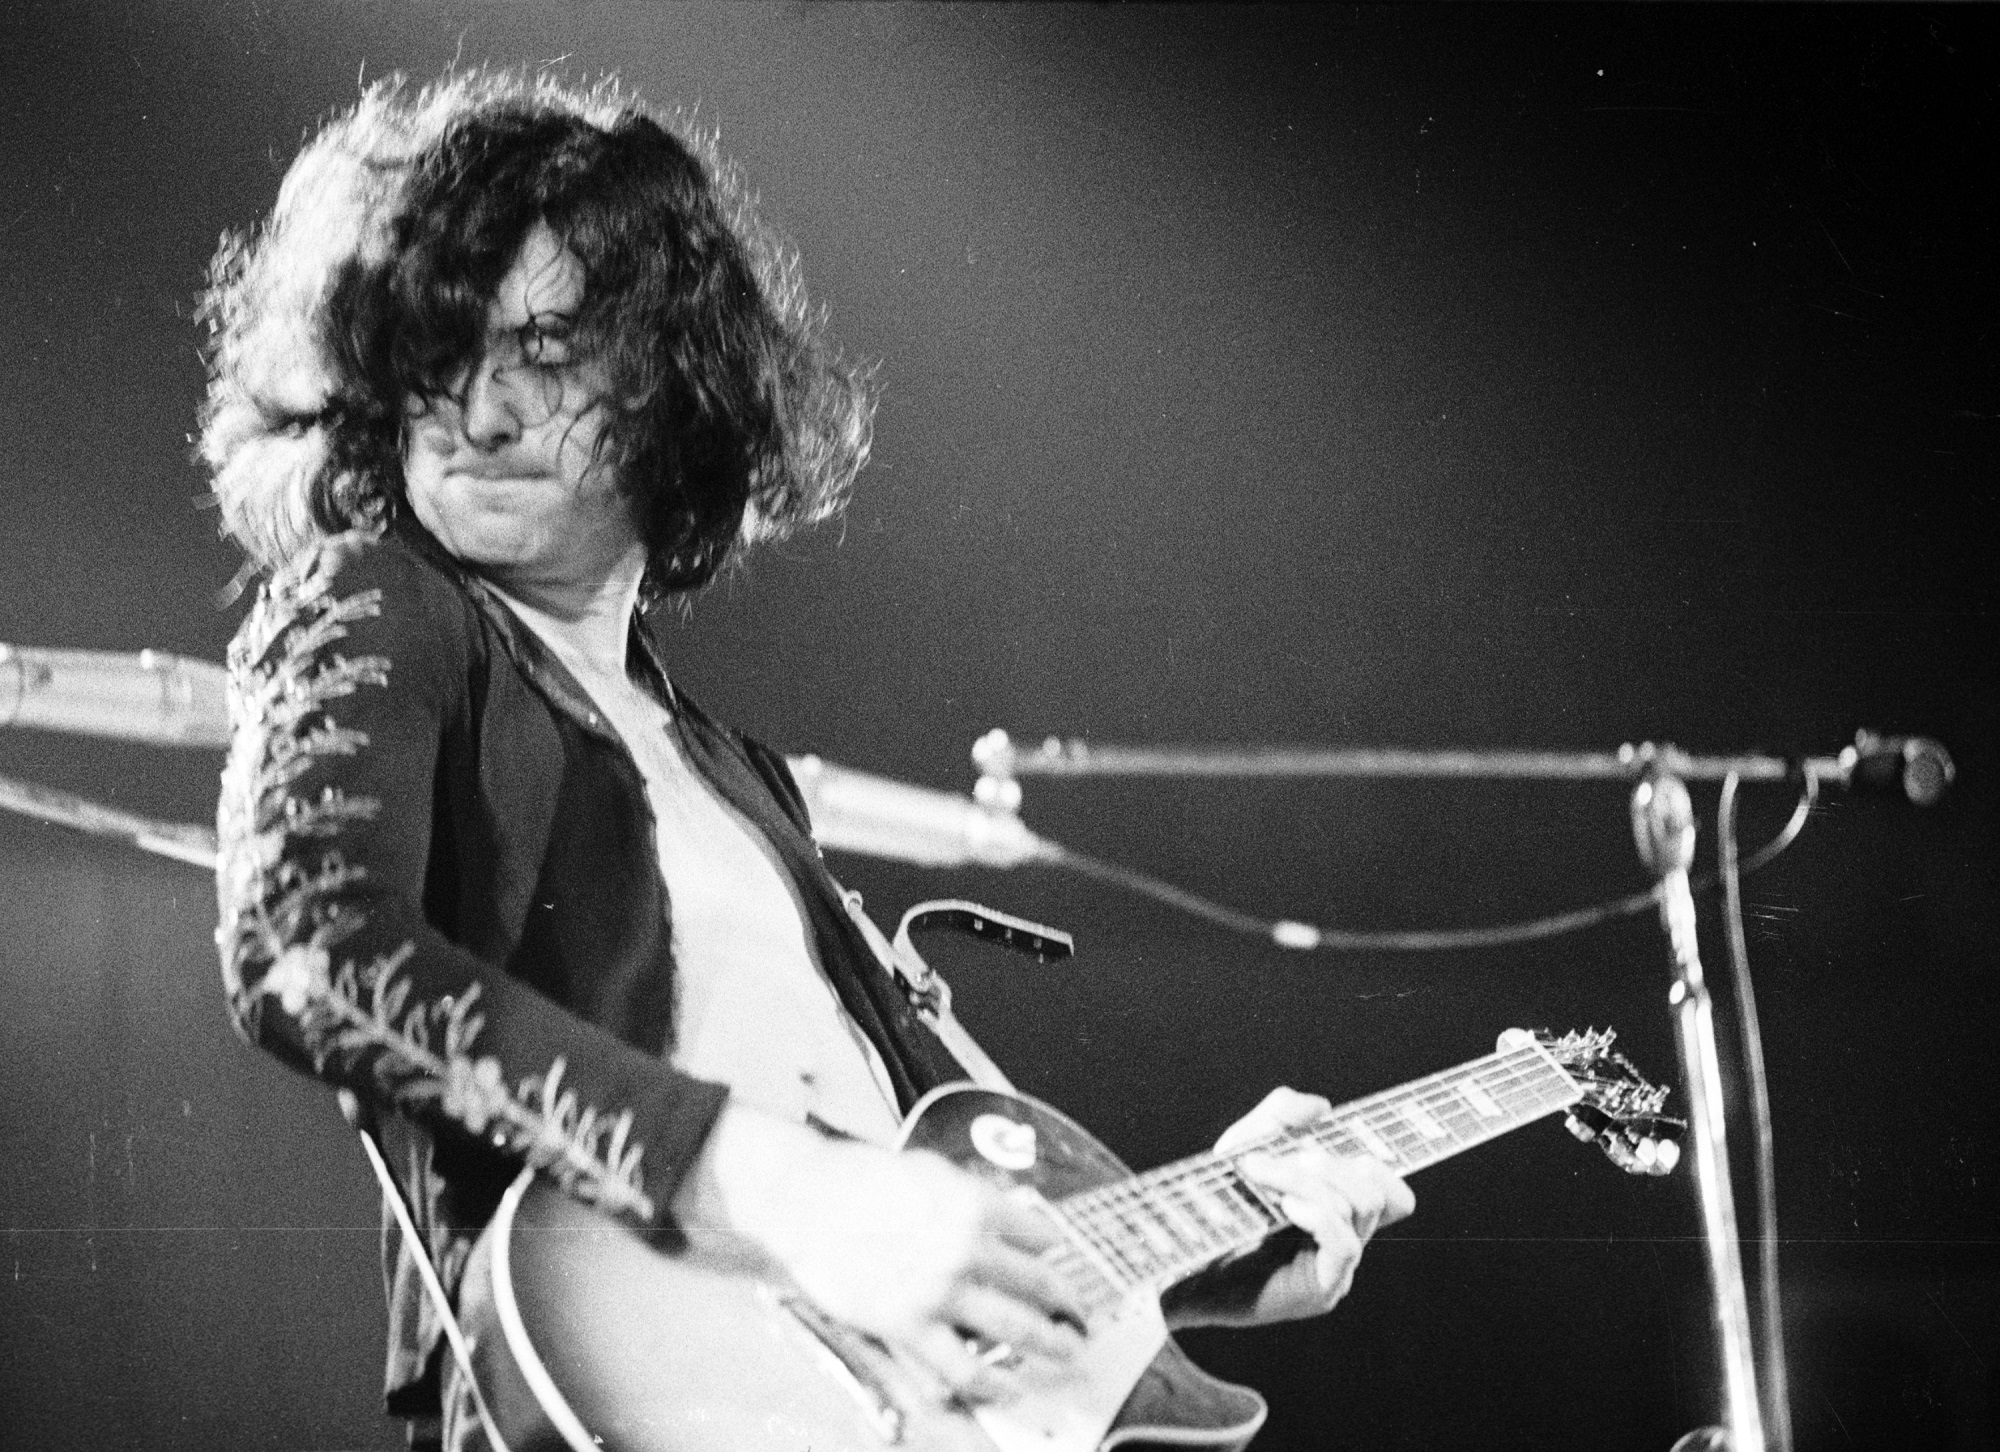 Teenage Jimmy Page and Jeff Beck Would Pore Over Elvis Presley Records to Pick out Who Played What